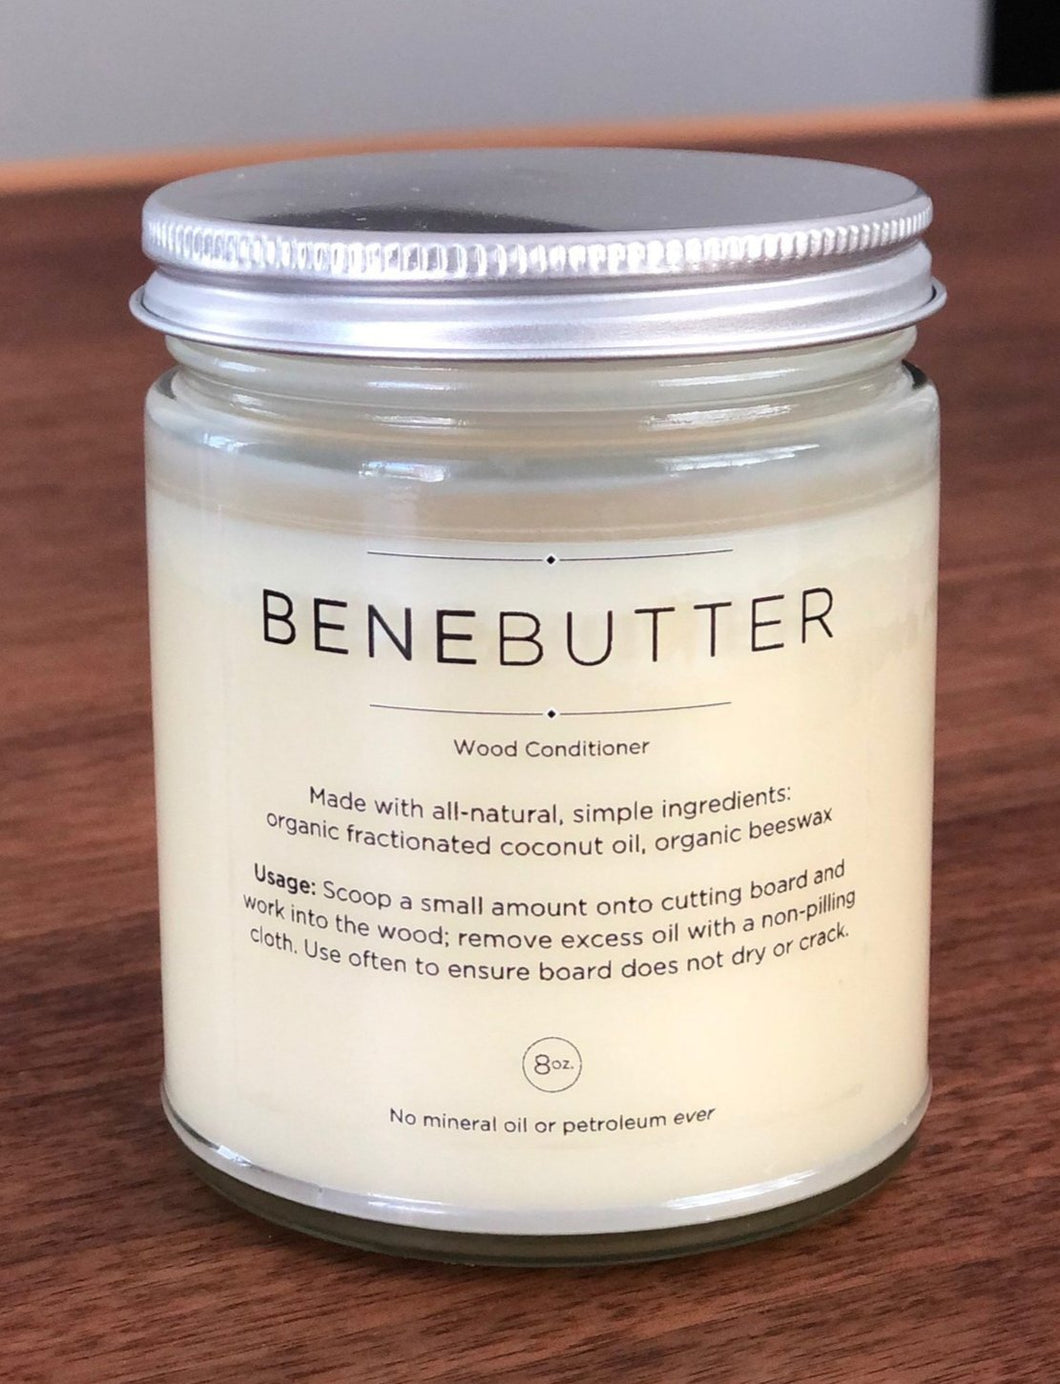 BeneButter Wood Conditioner for Cutting Boards (8 oz.)